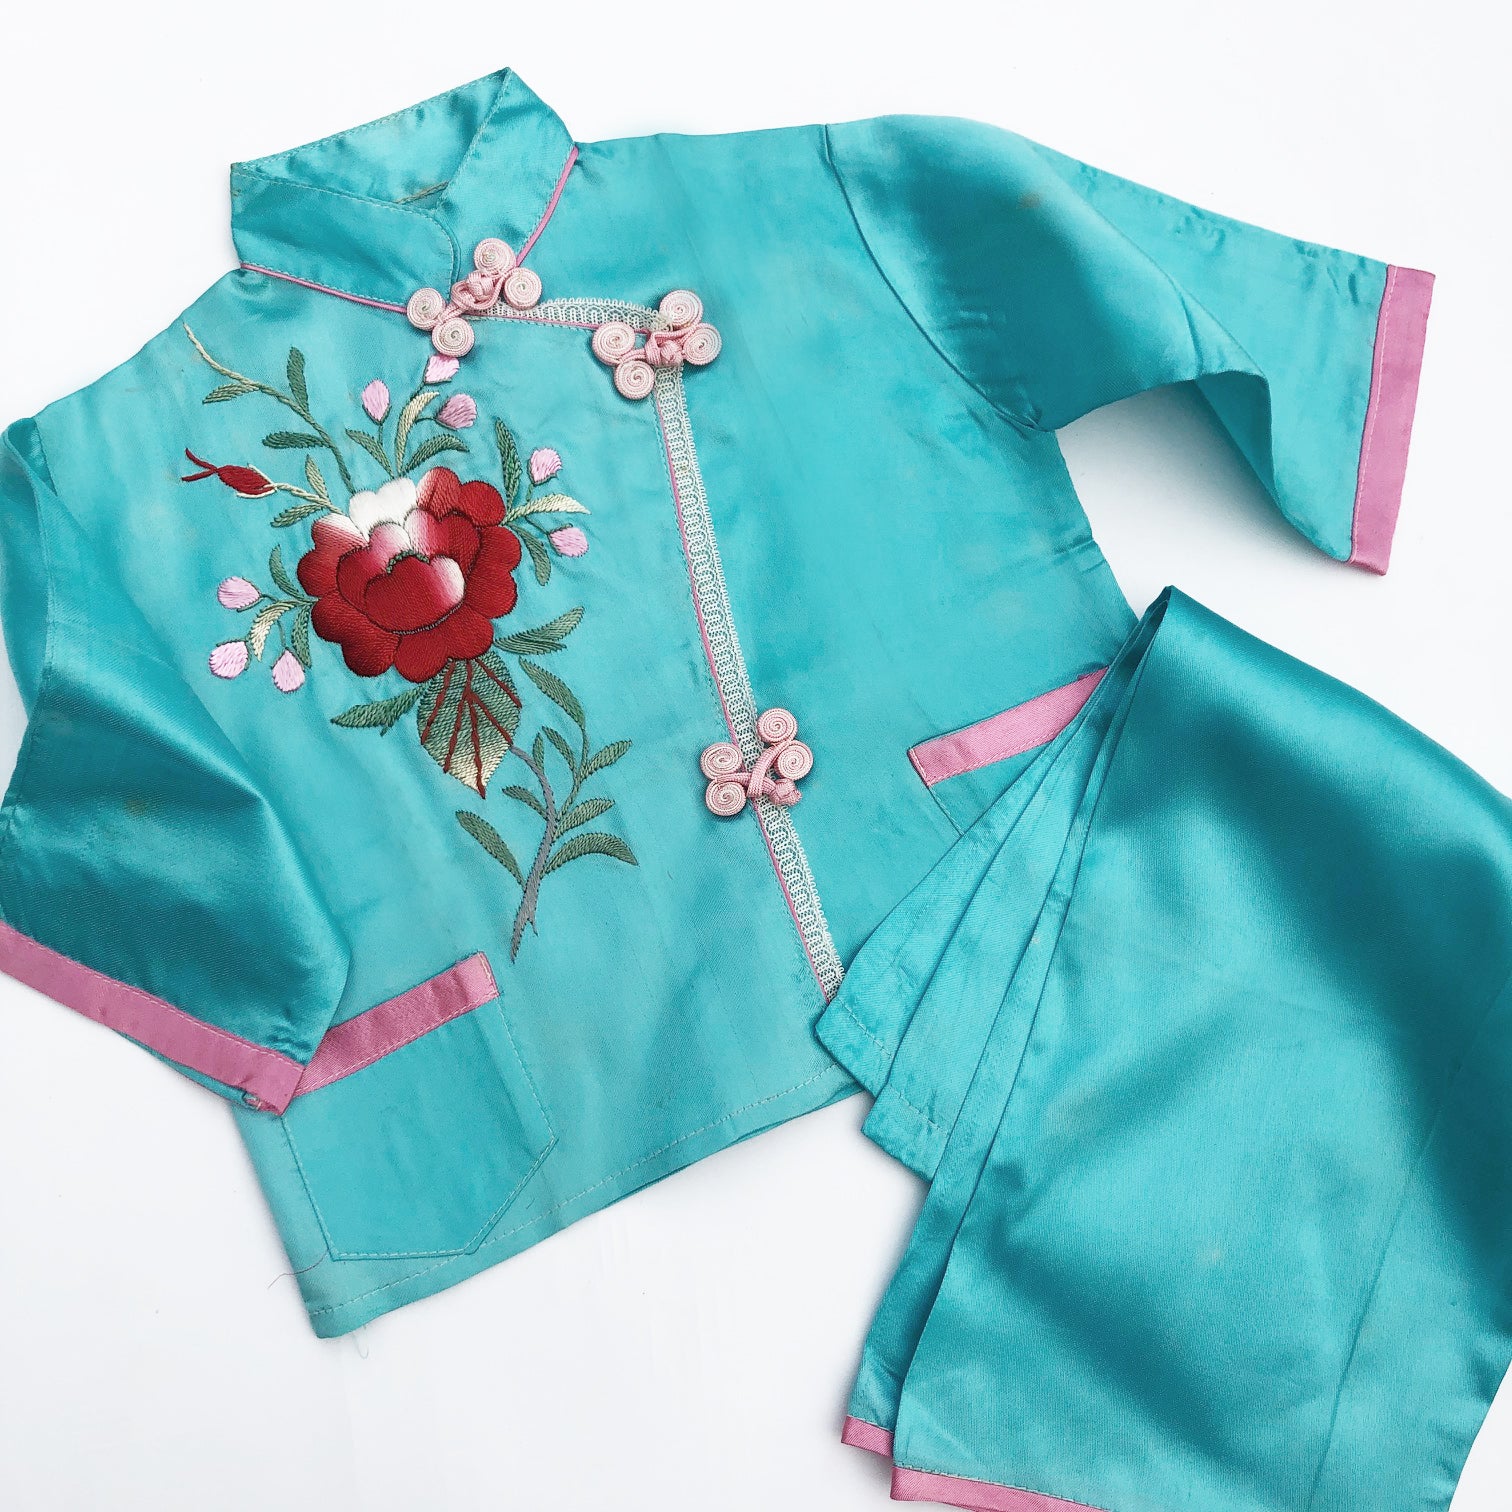 Vintage Embroidered Cheongsam Pajamas size 12-24 months.